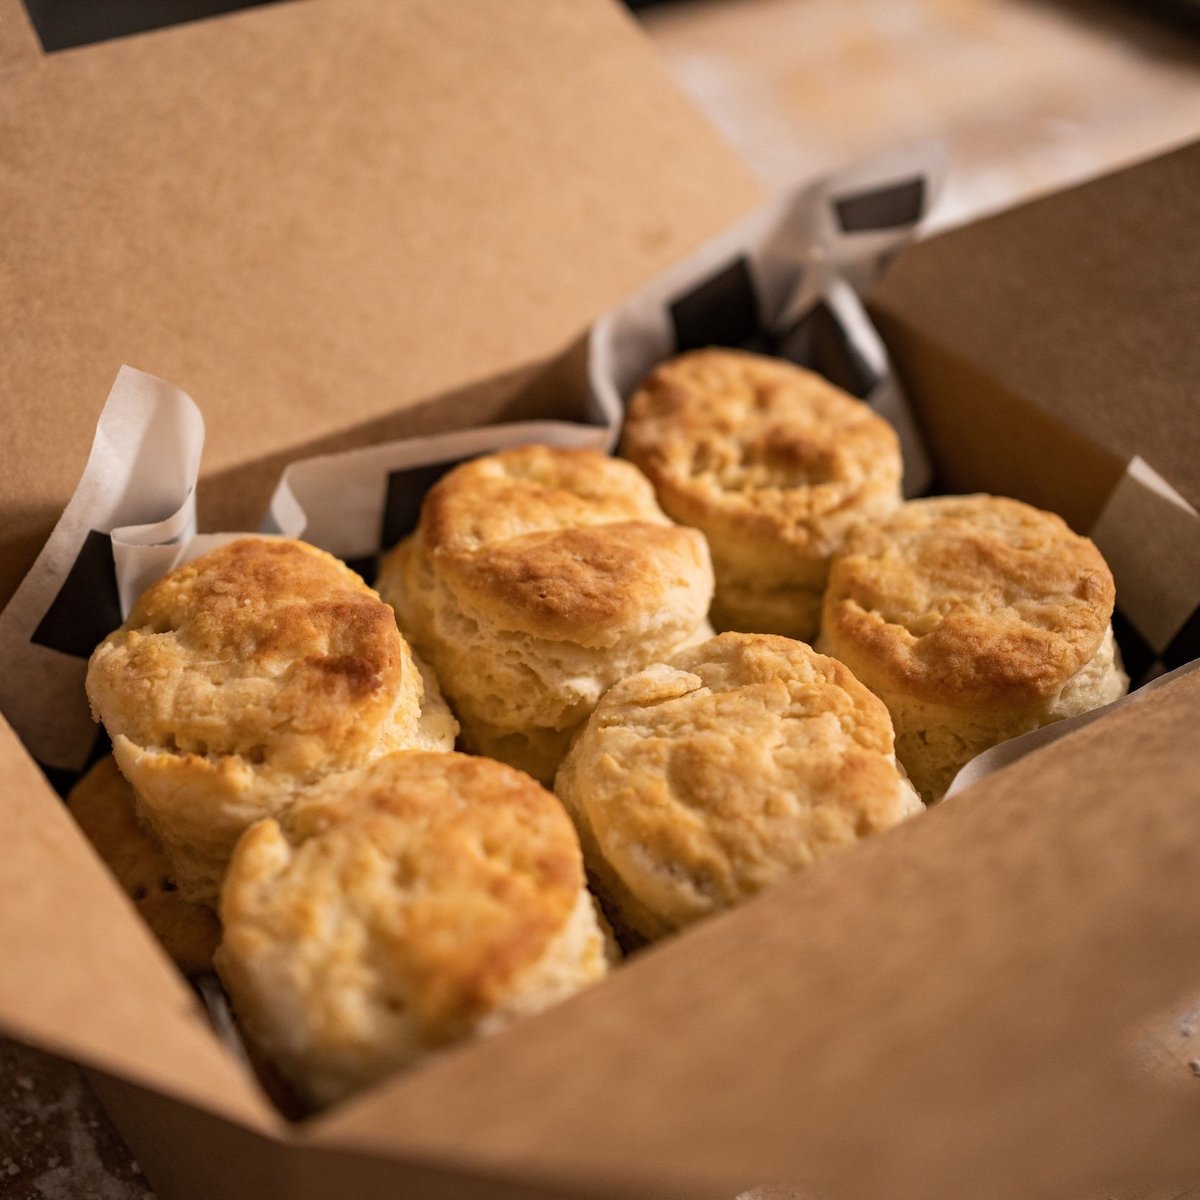 Hutchinson’s Finest Biscuits Scouting New Space as Commercial Kitchen Nears Closing